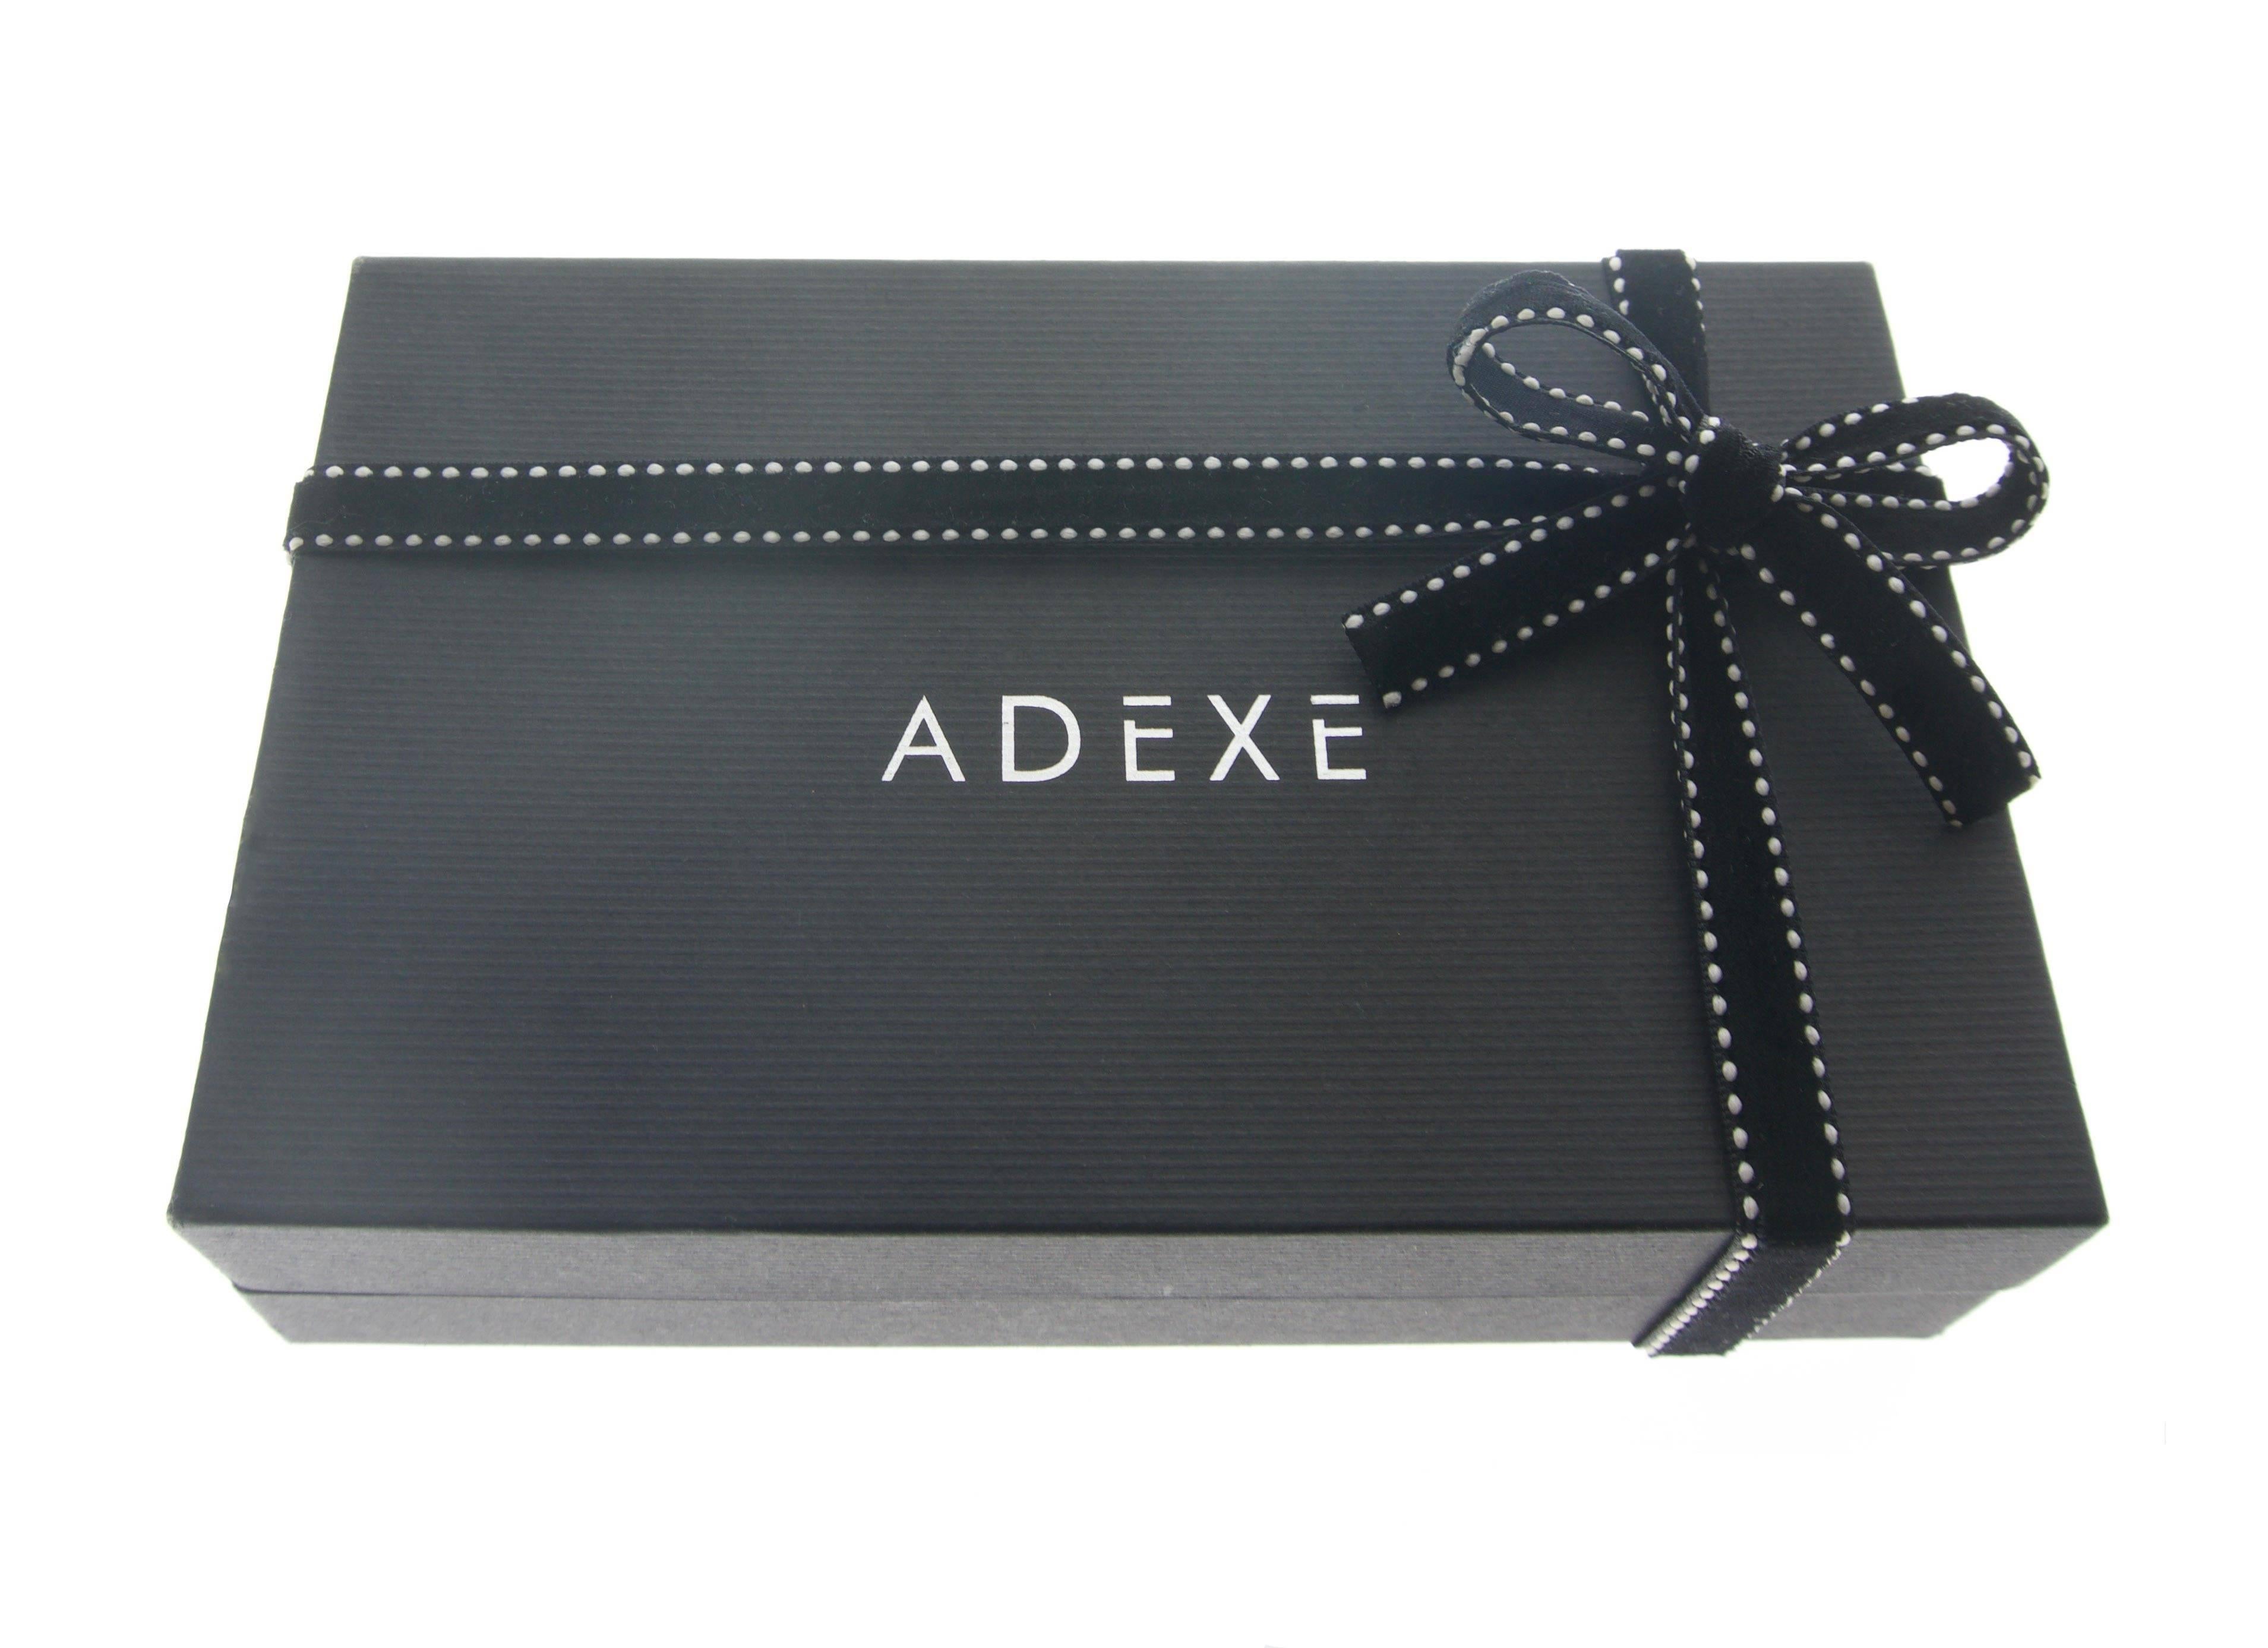 Adexe Watches Meek Petite Minimal Silver  In New Condition For Sale In London, GB